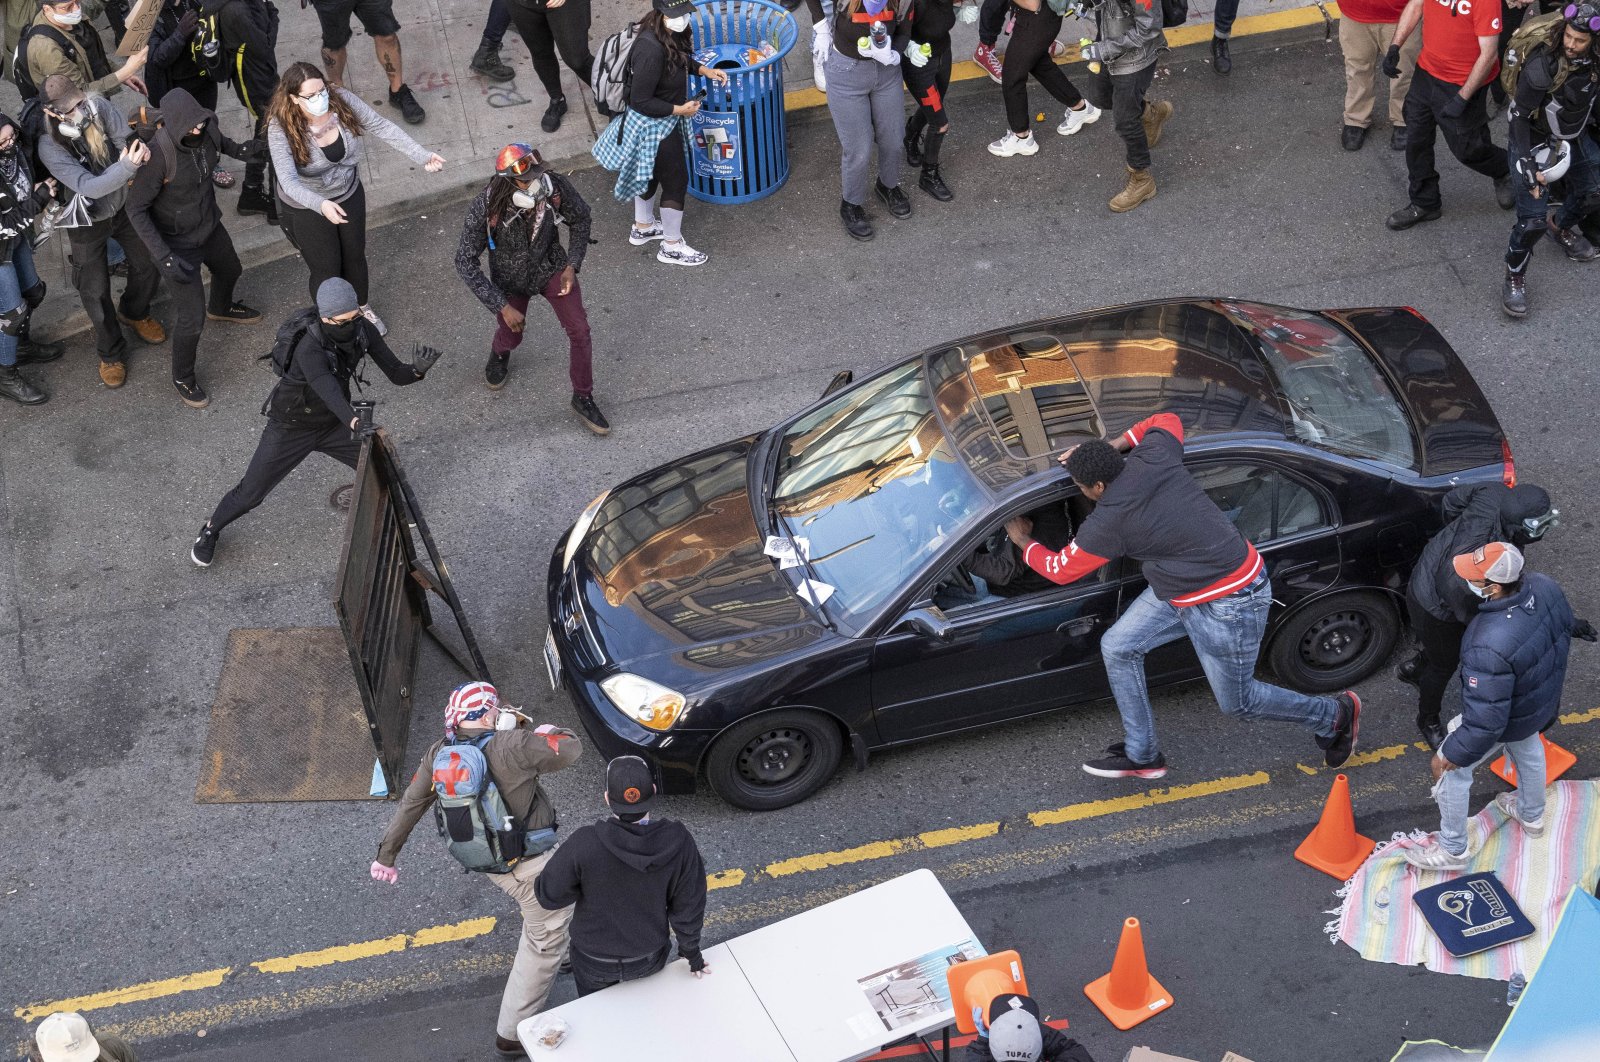 A man drives into the crowd at 11th and Pike, injuring at least one person, Seattle, June 7, 2020. (AP Photo)